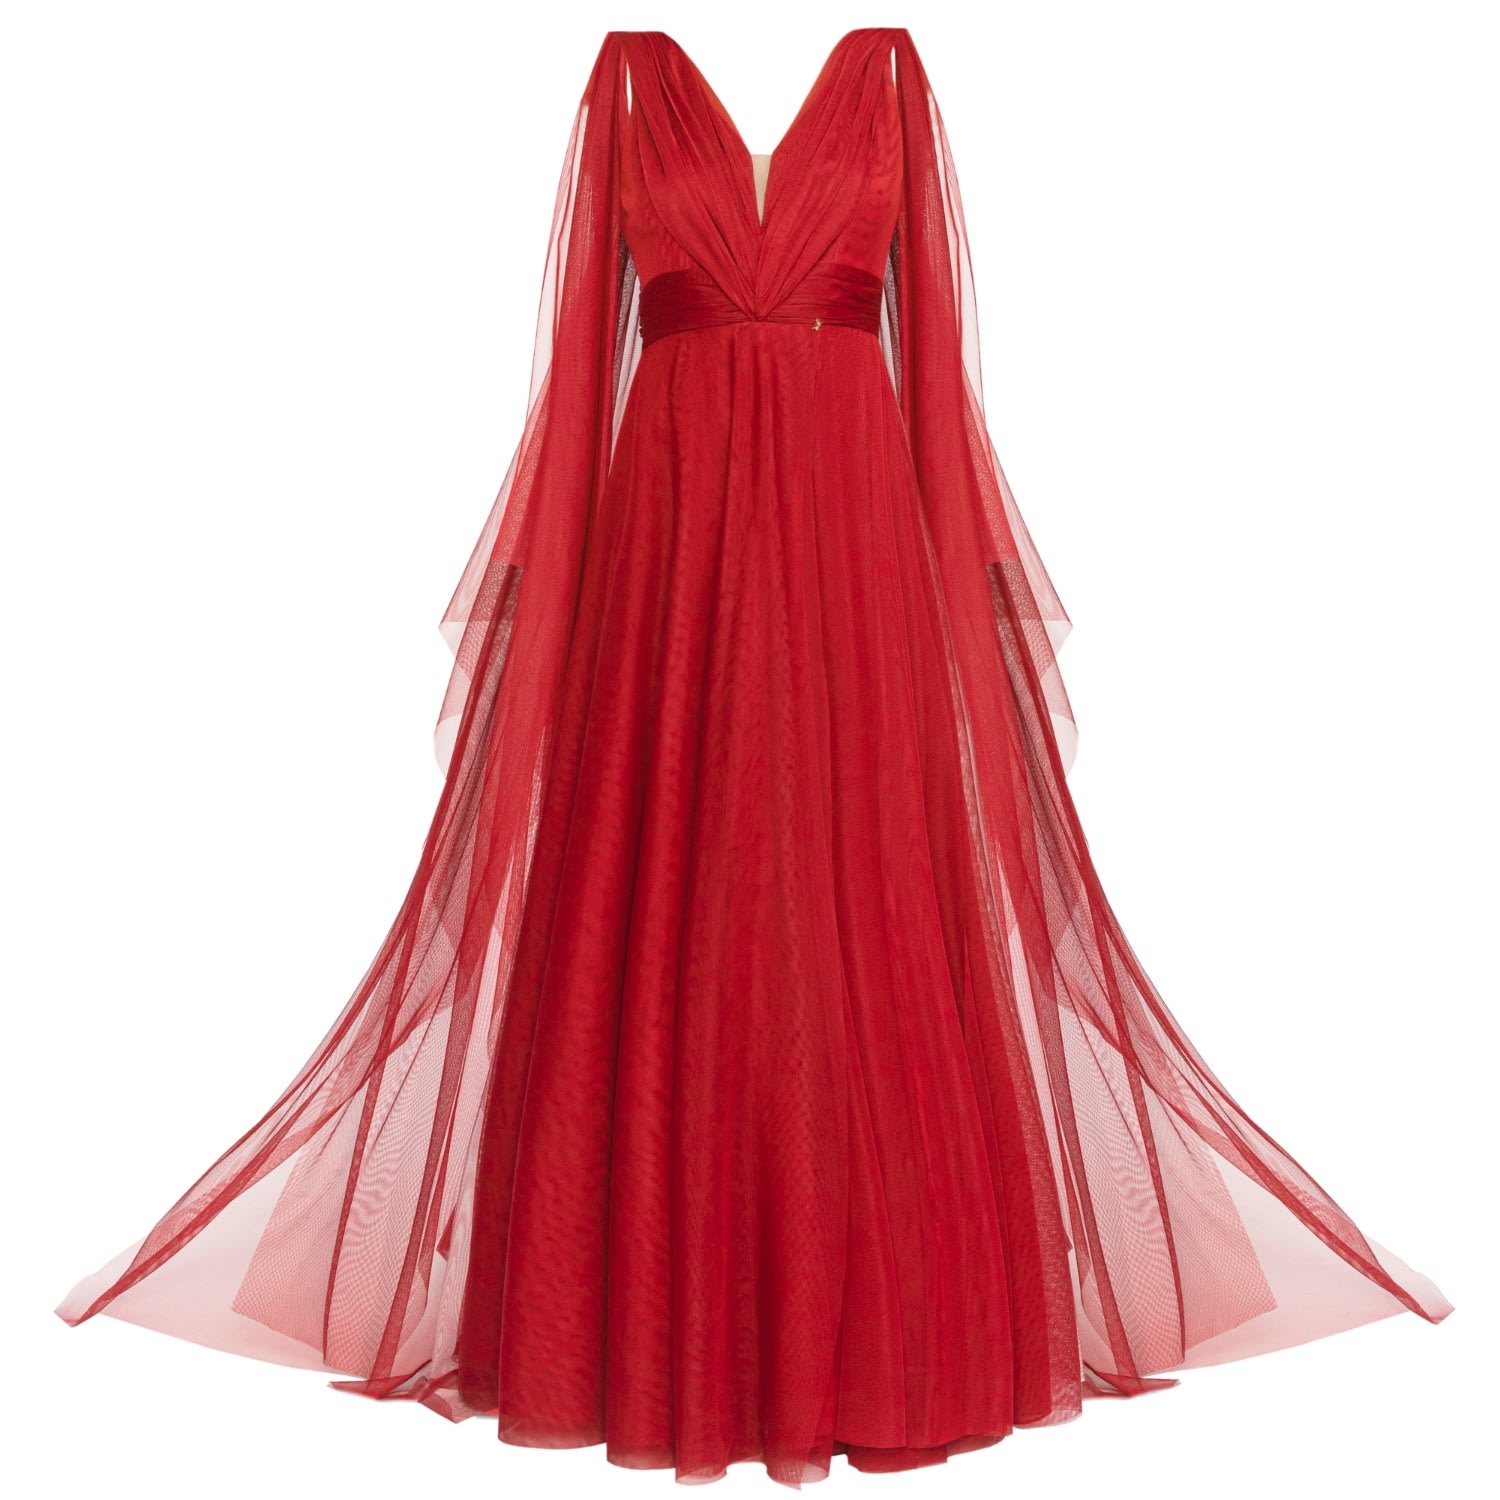 Women’s Terracotta Tulle Evening Gown Red Medium Angelika Jozefczyk